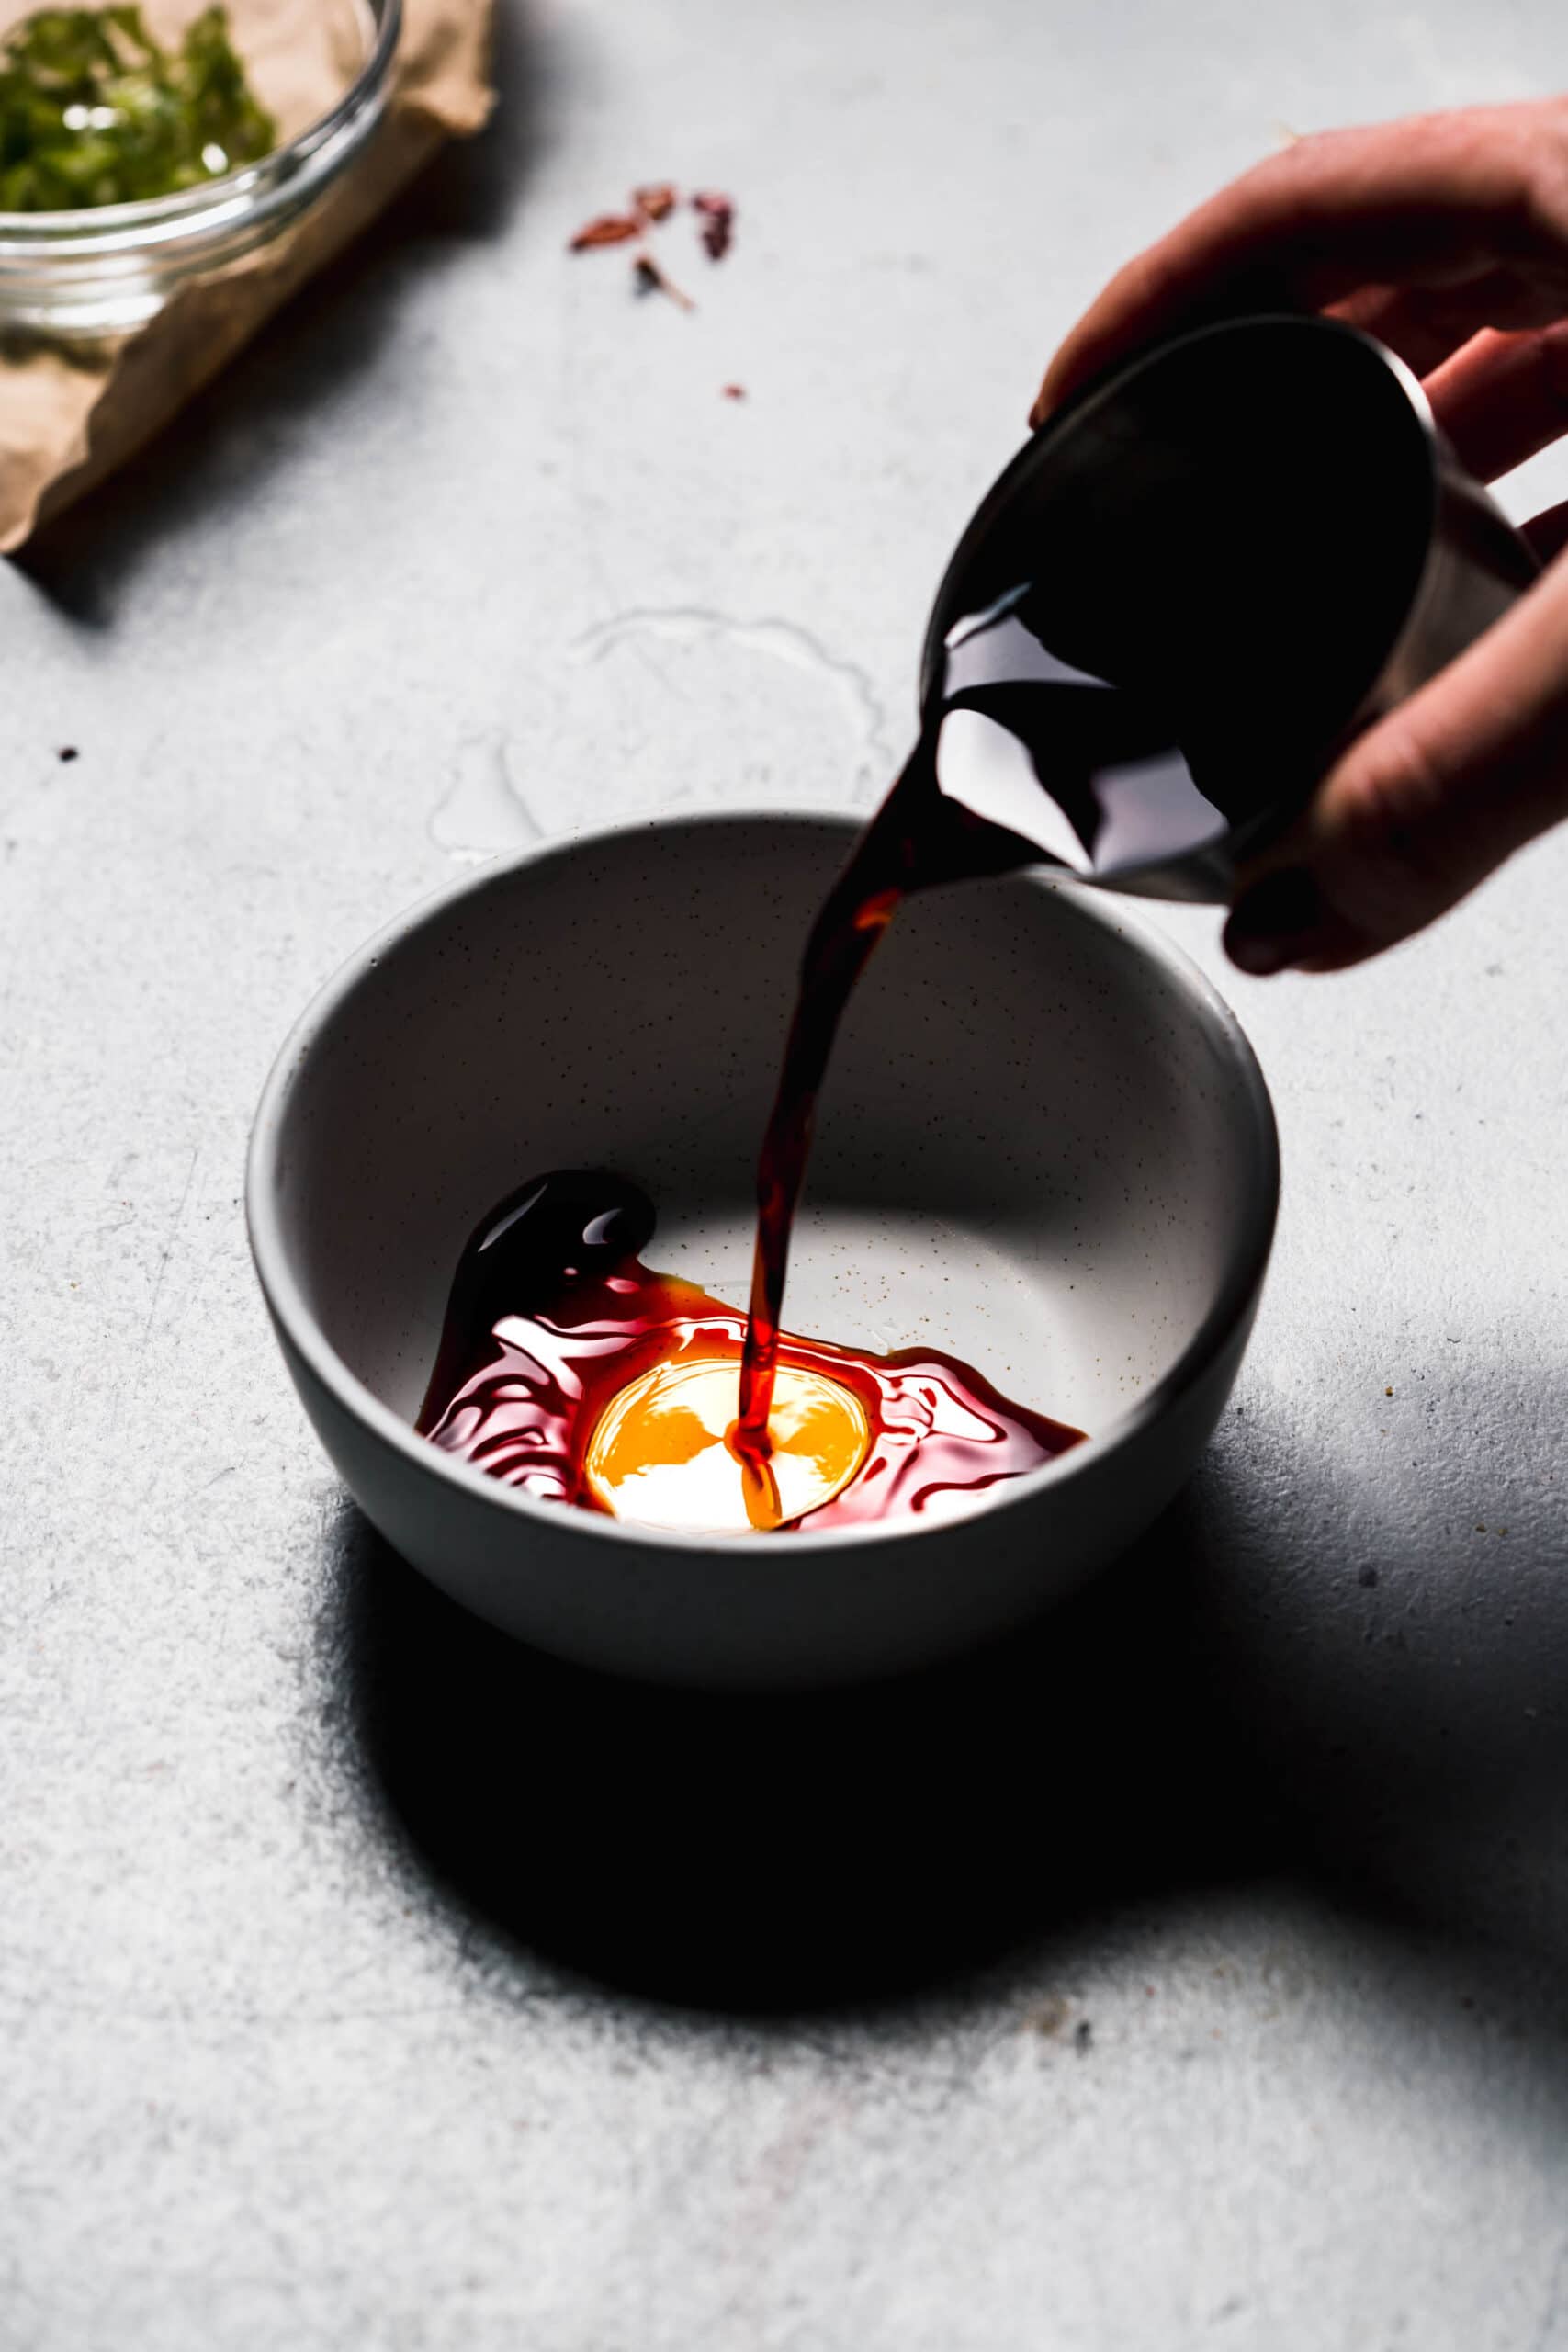 Soy sauce pouring into bowl.